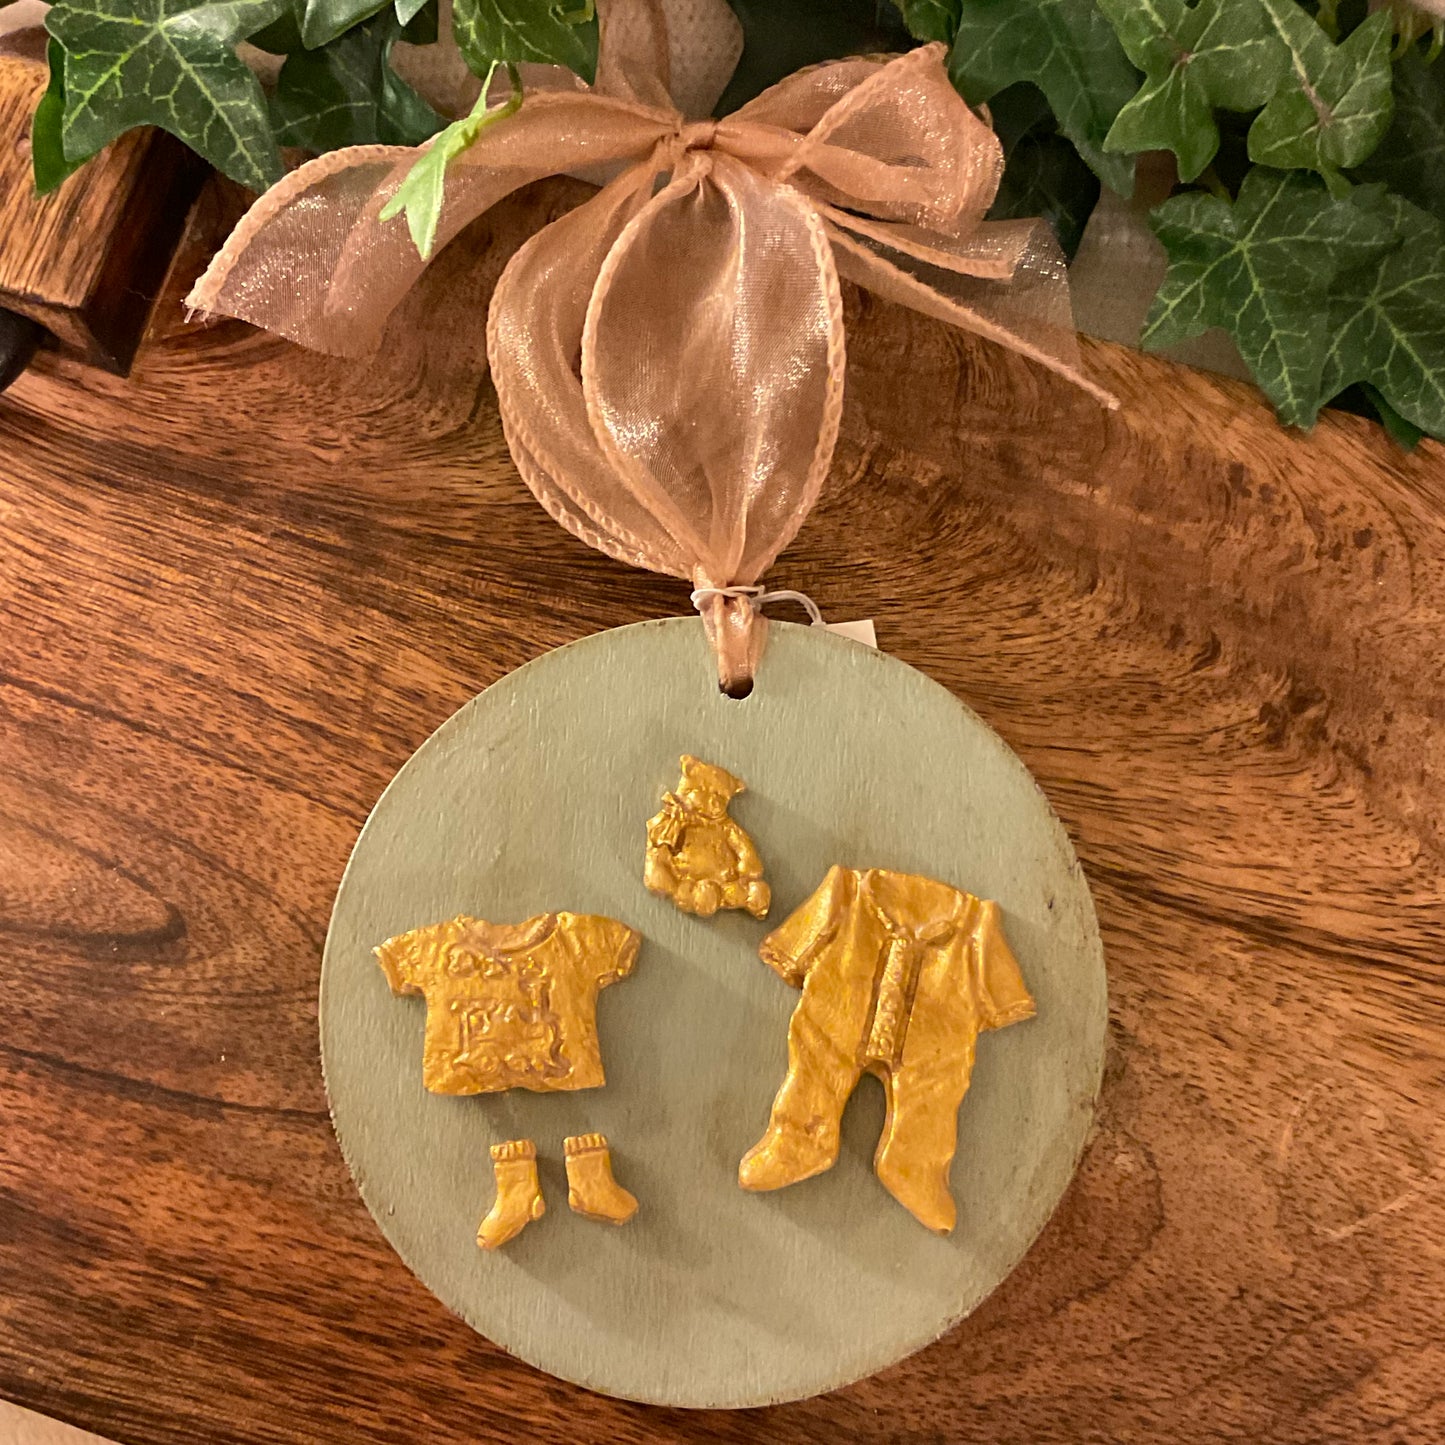 Handmade Casted Intaglio and Wood Art • Baby, Dance Recital and Religious Items